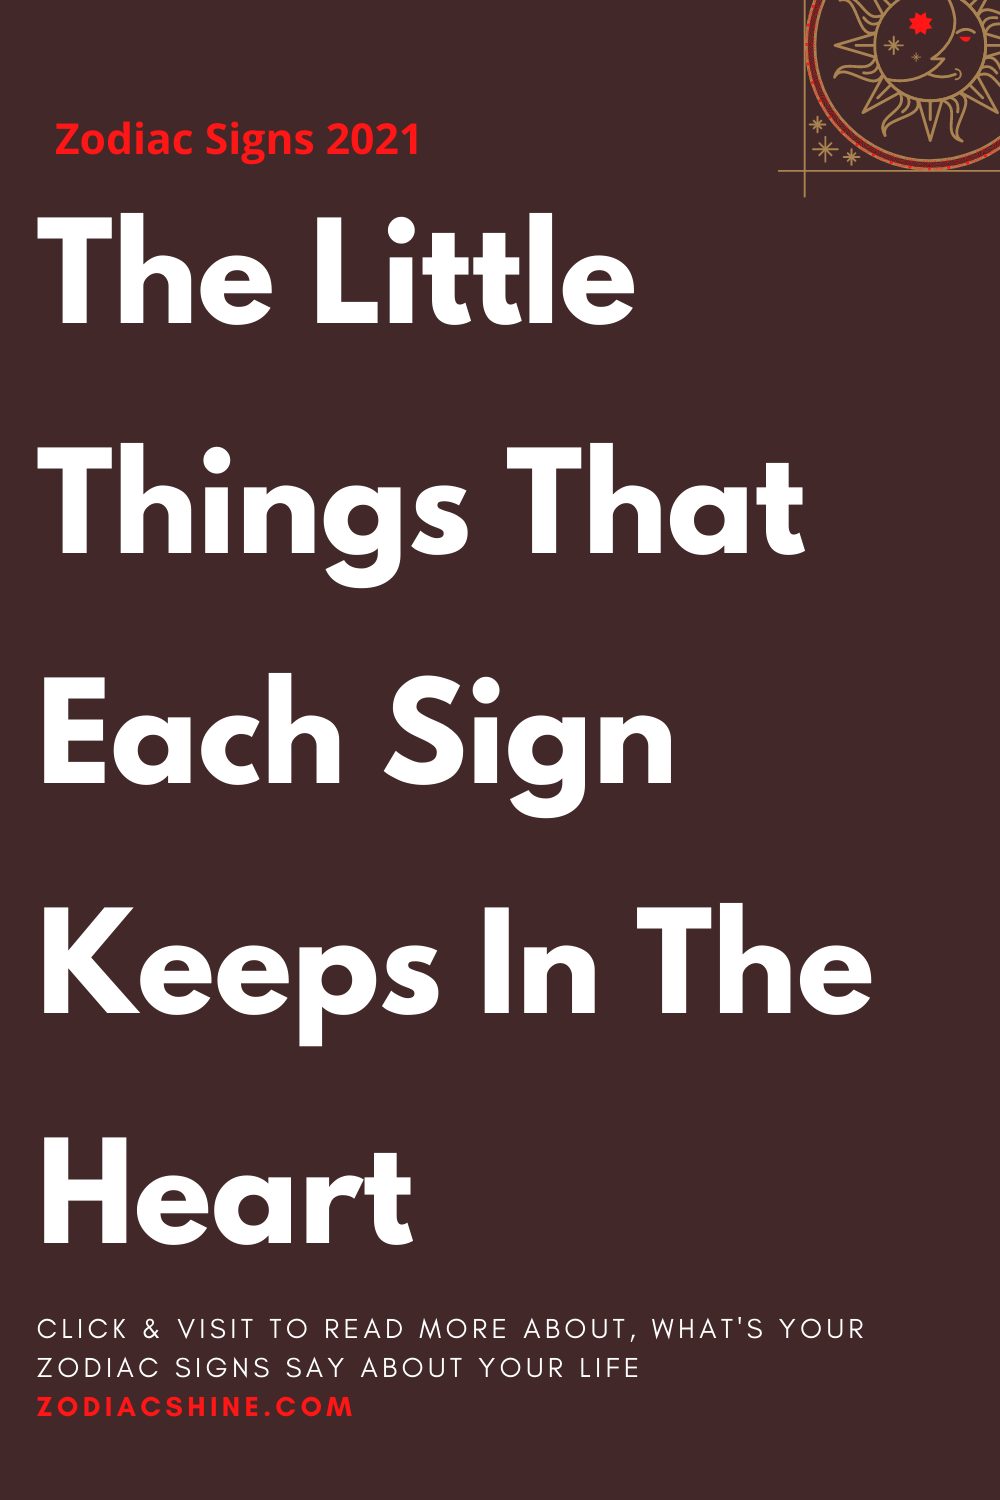 The Little Things That Each Sign Keeps In The Heart